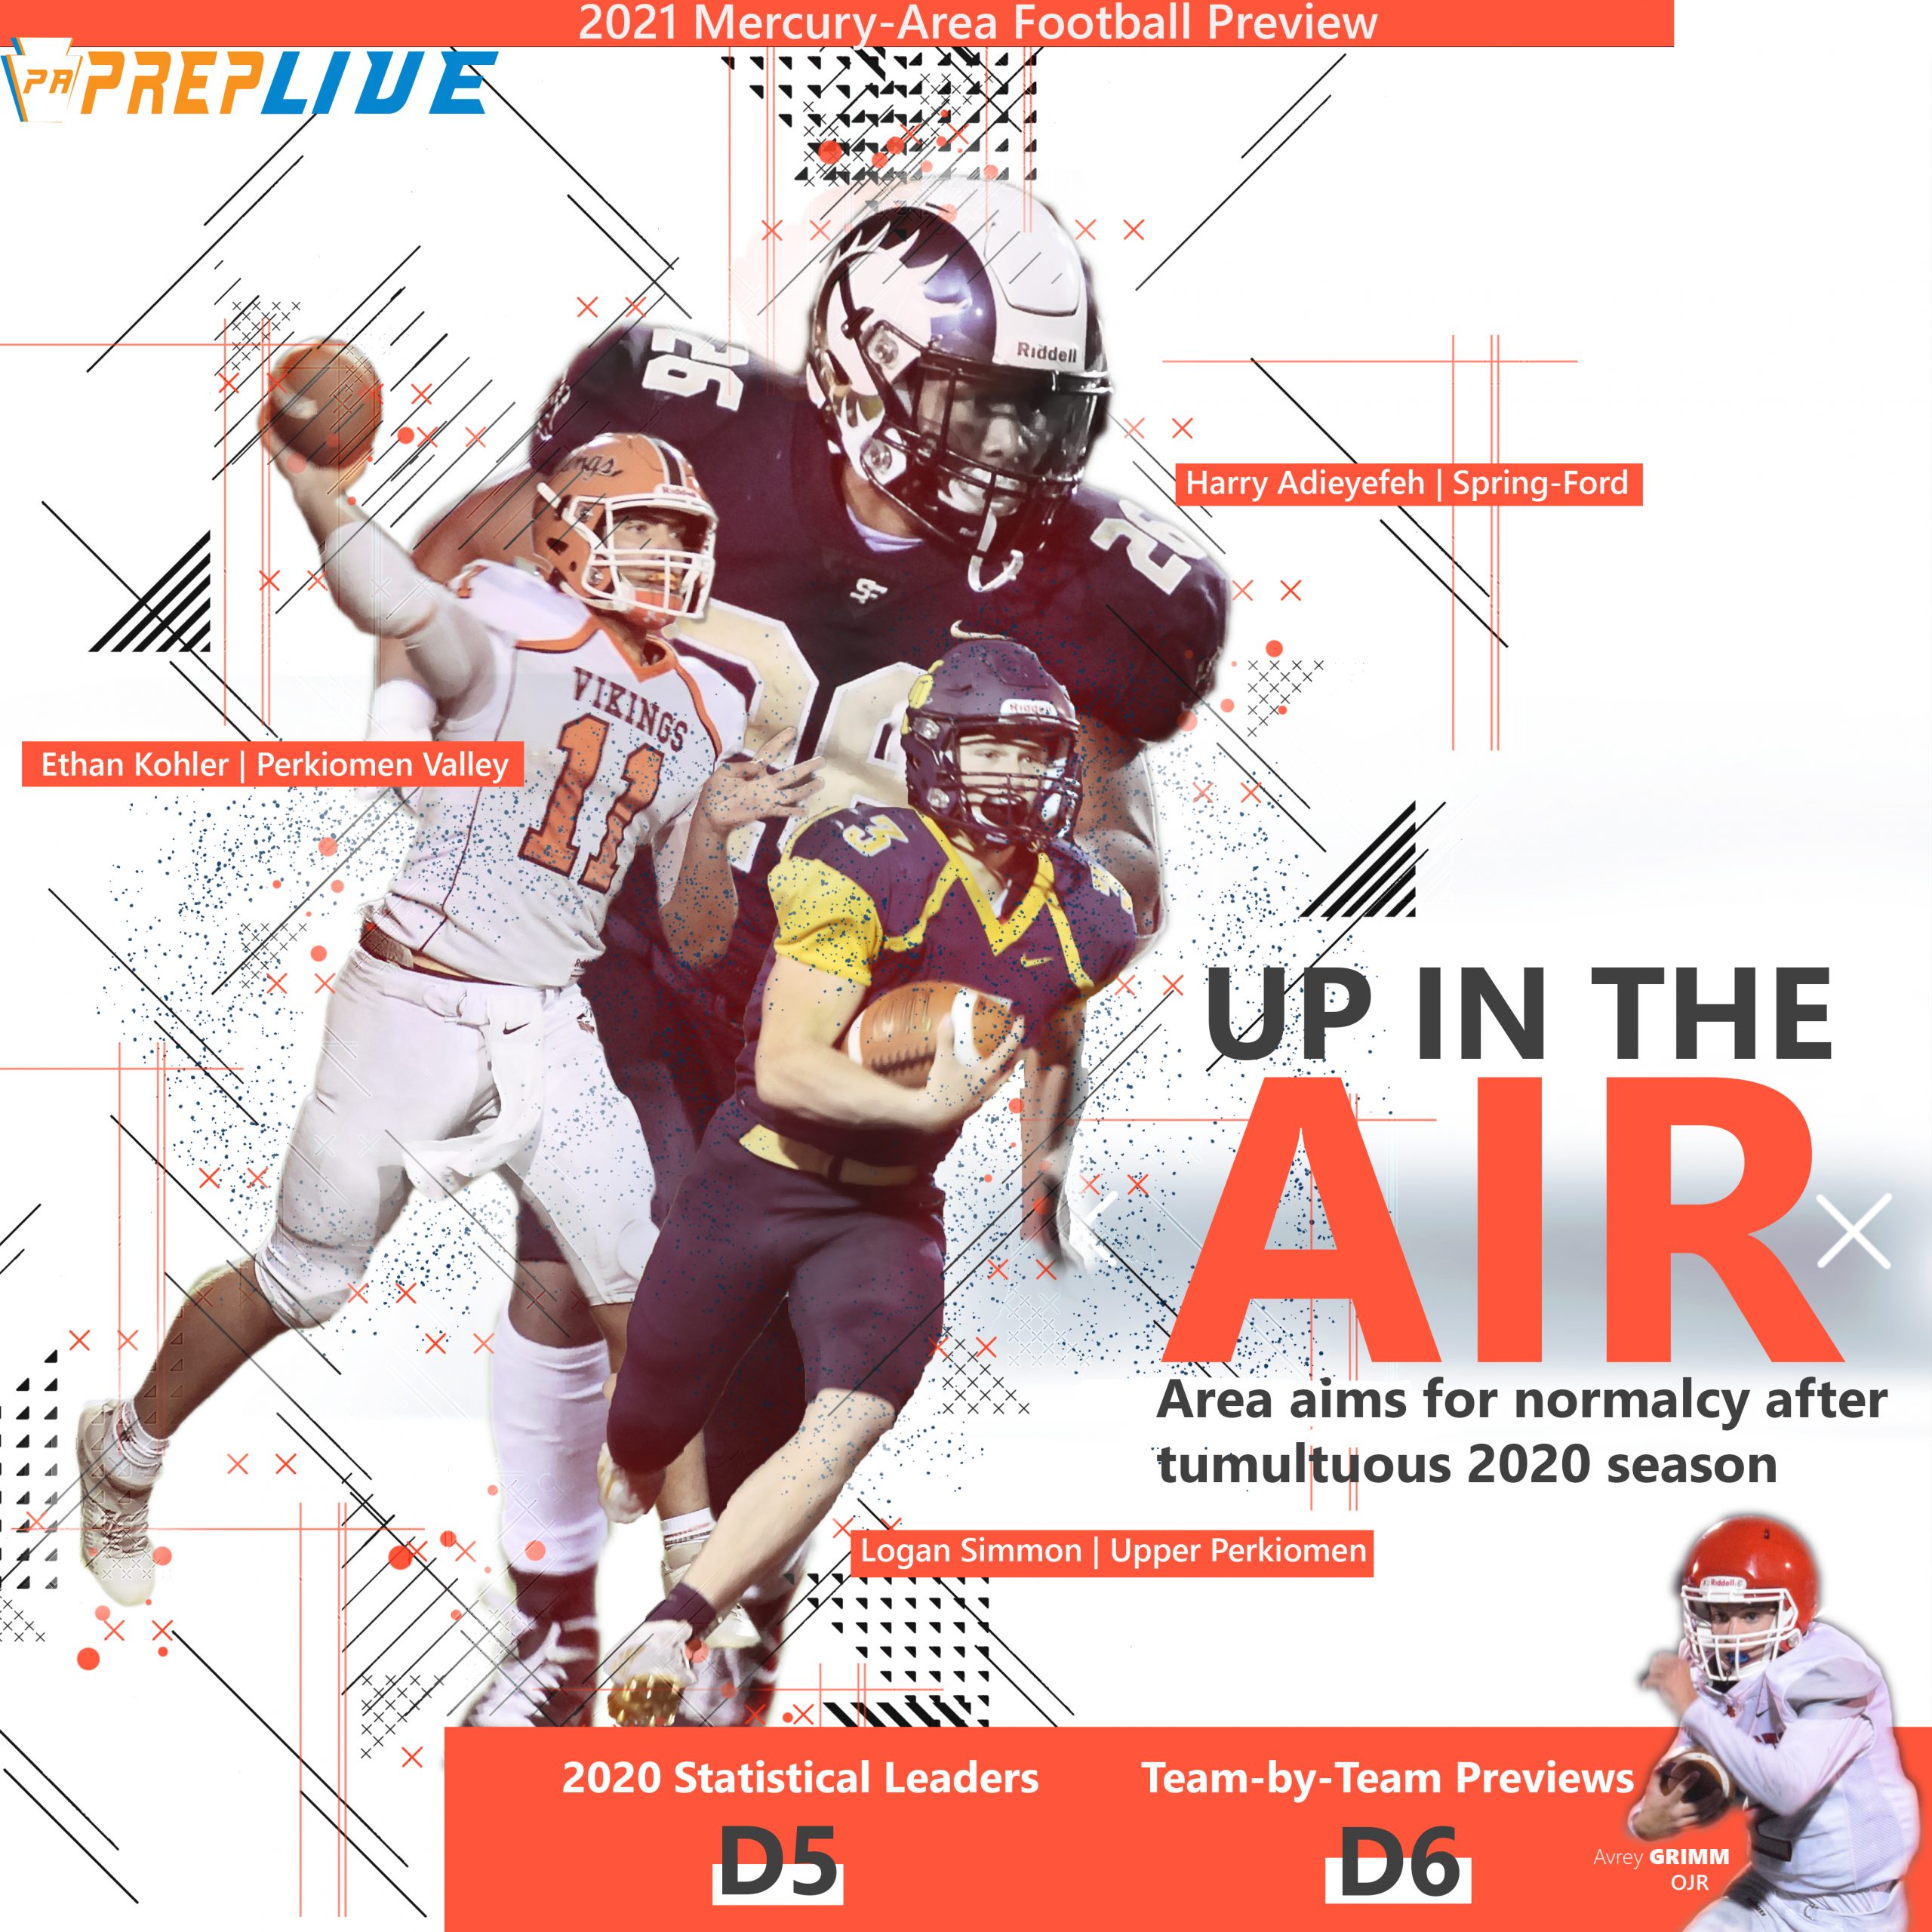 Mercury Football Preview Cover 2021